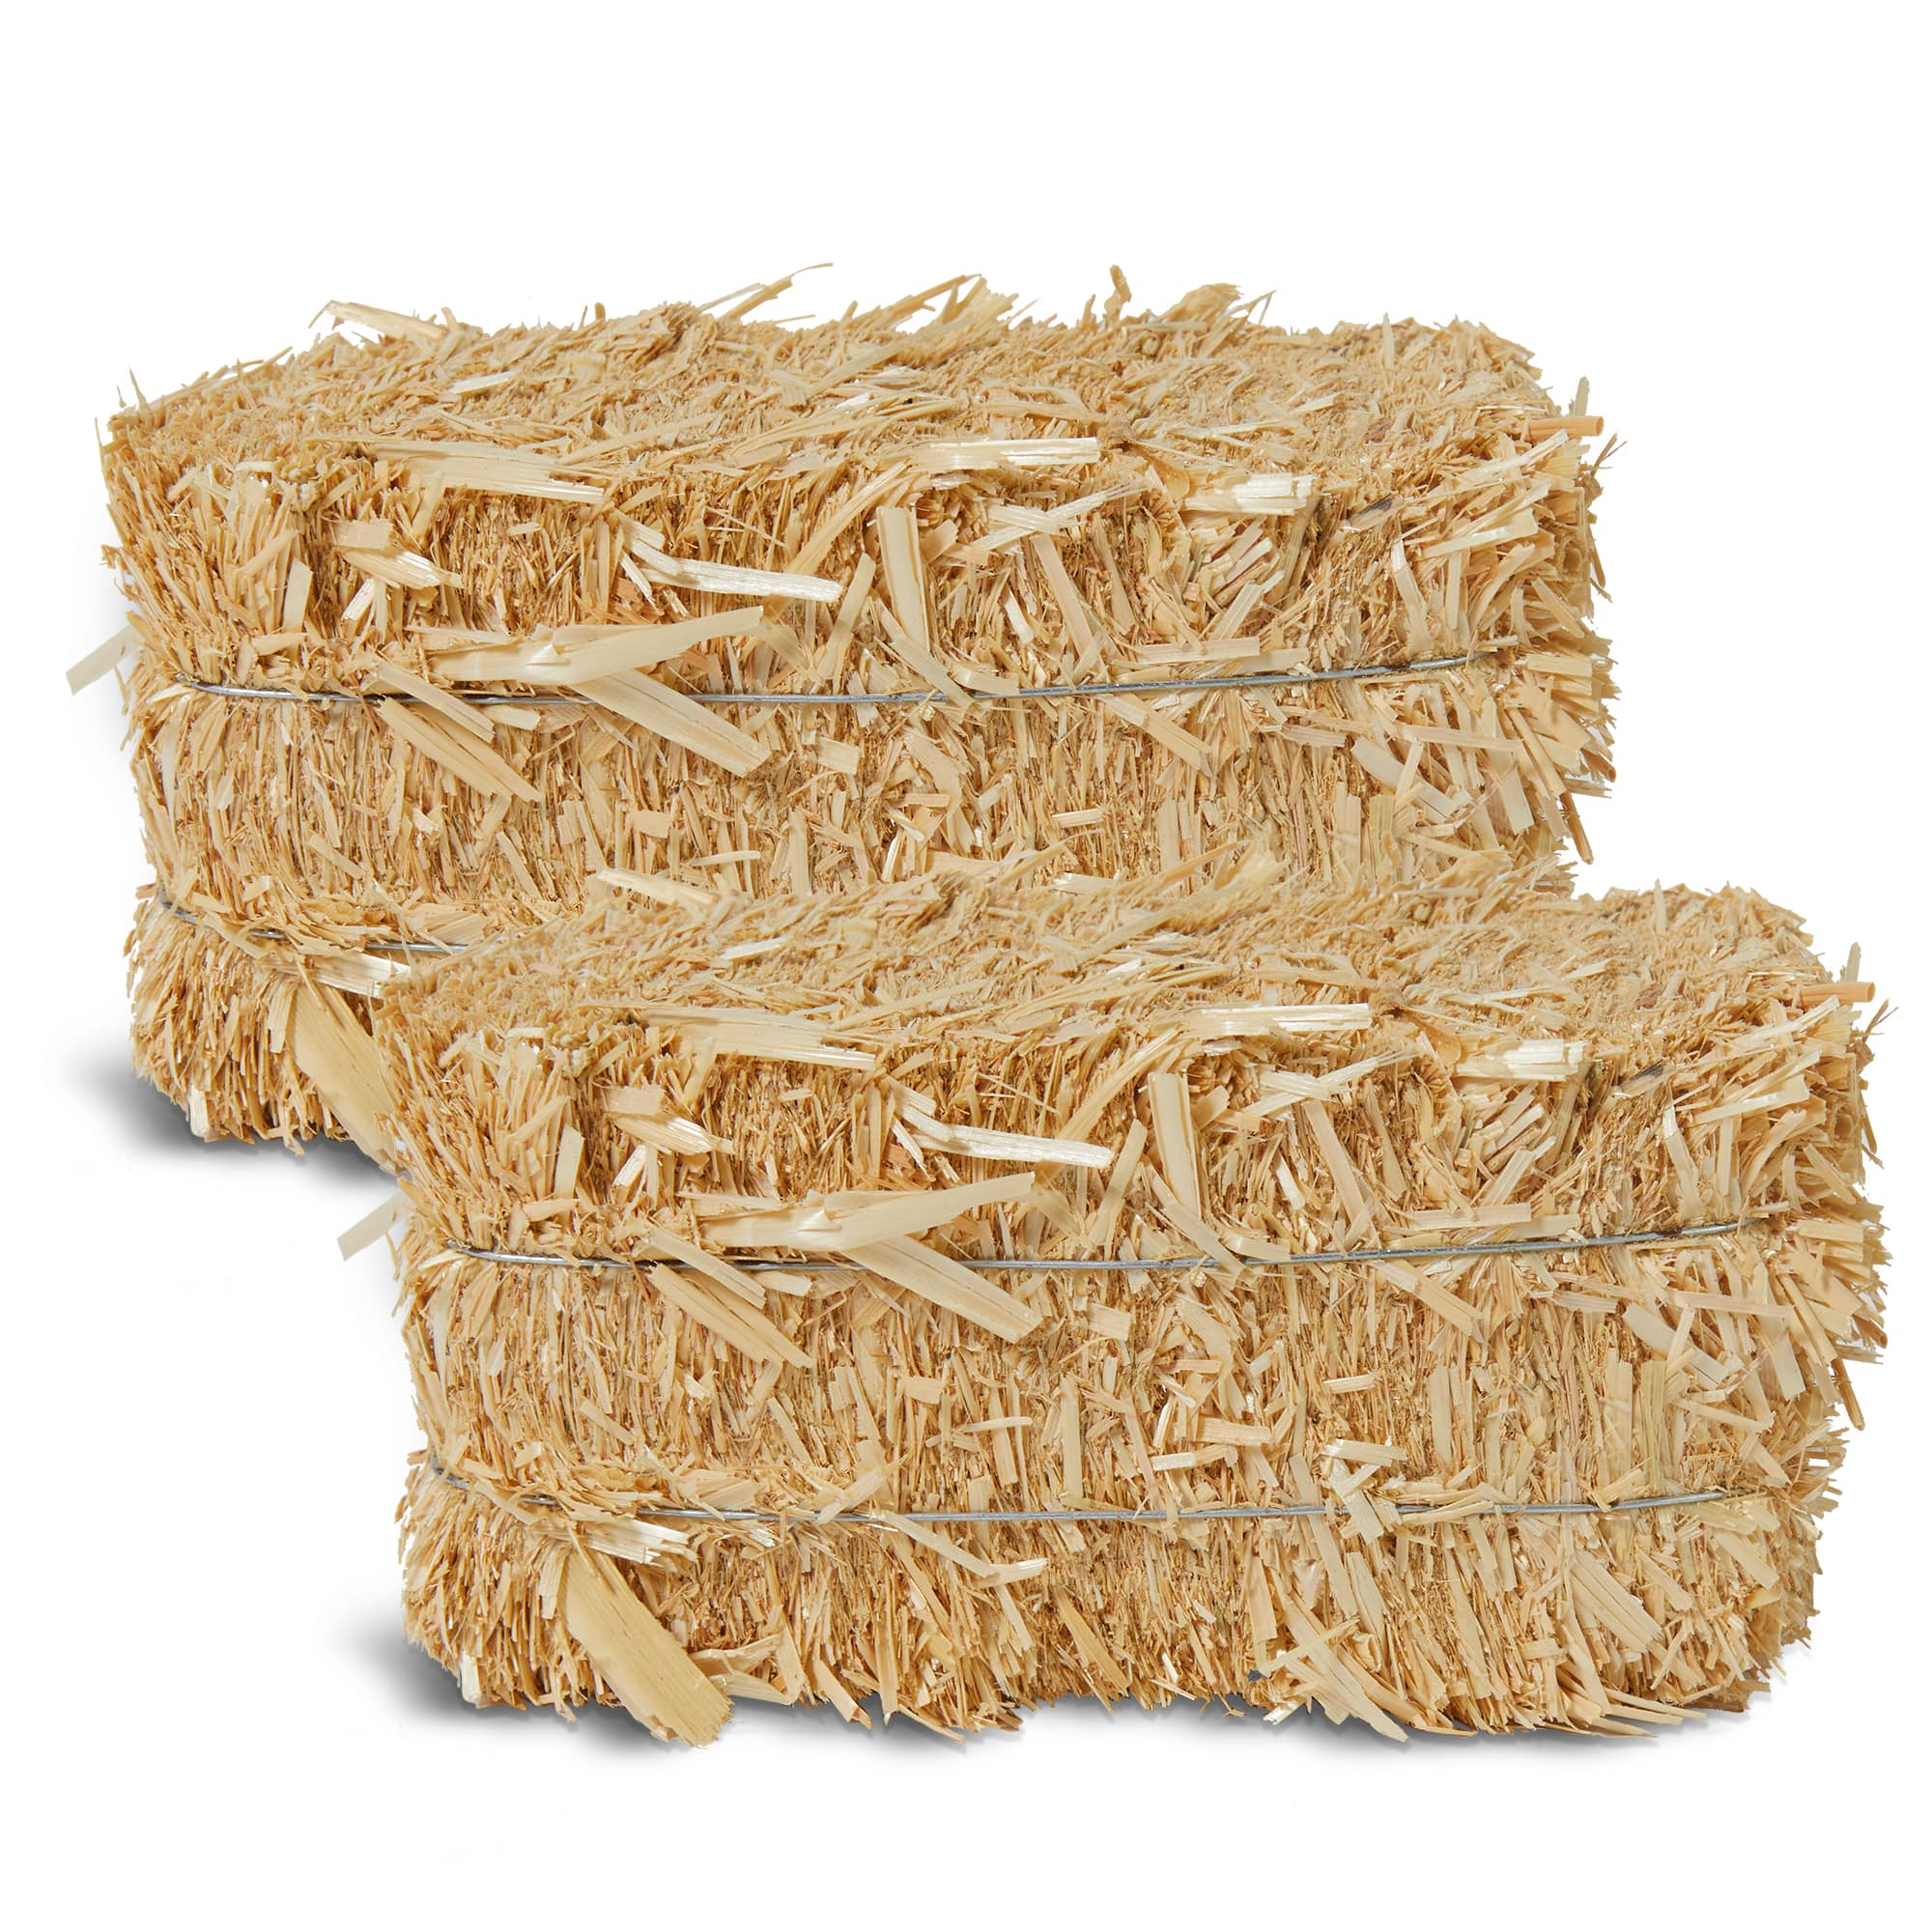 12 Pack: 2 inch Straw Bale by Ashland, Yellow